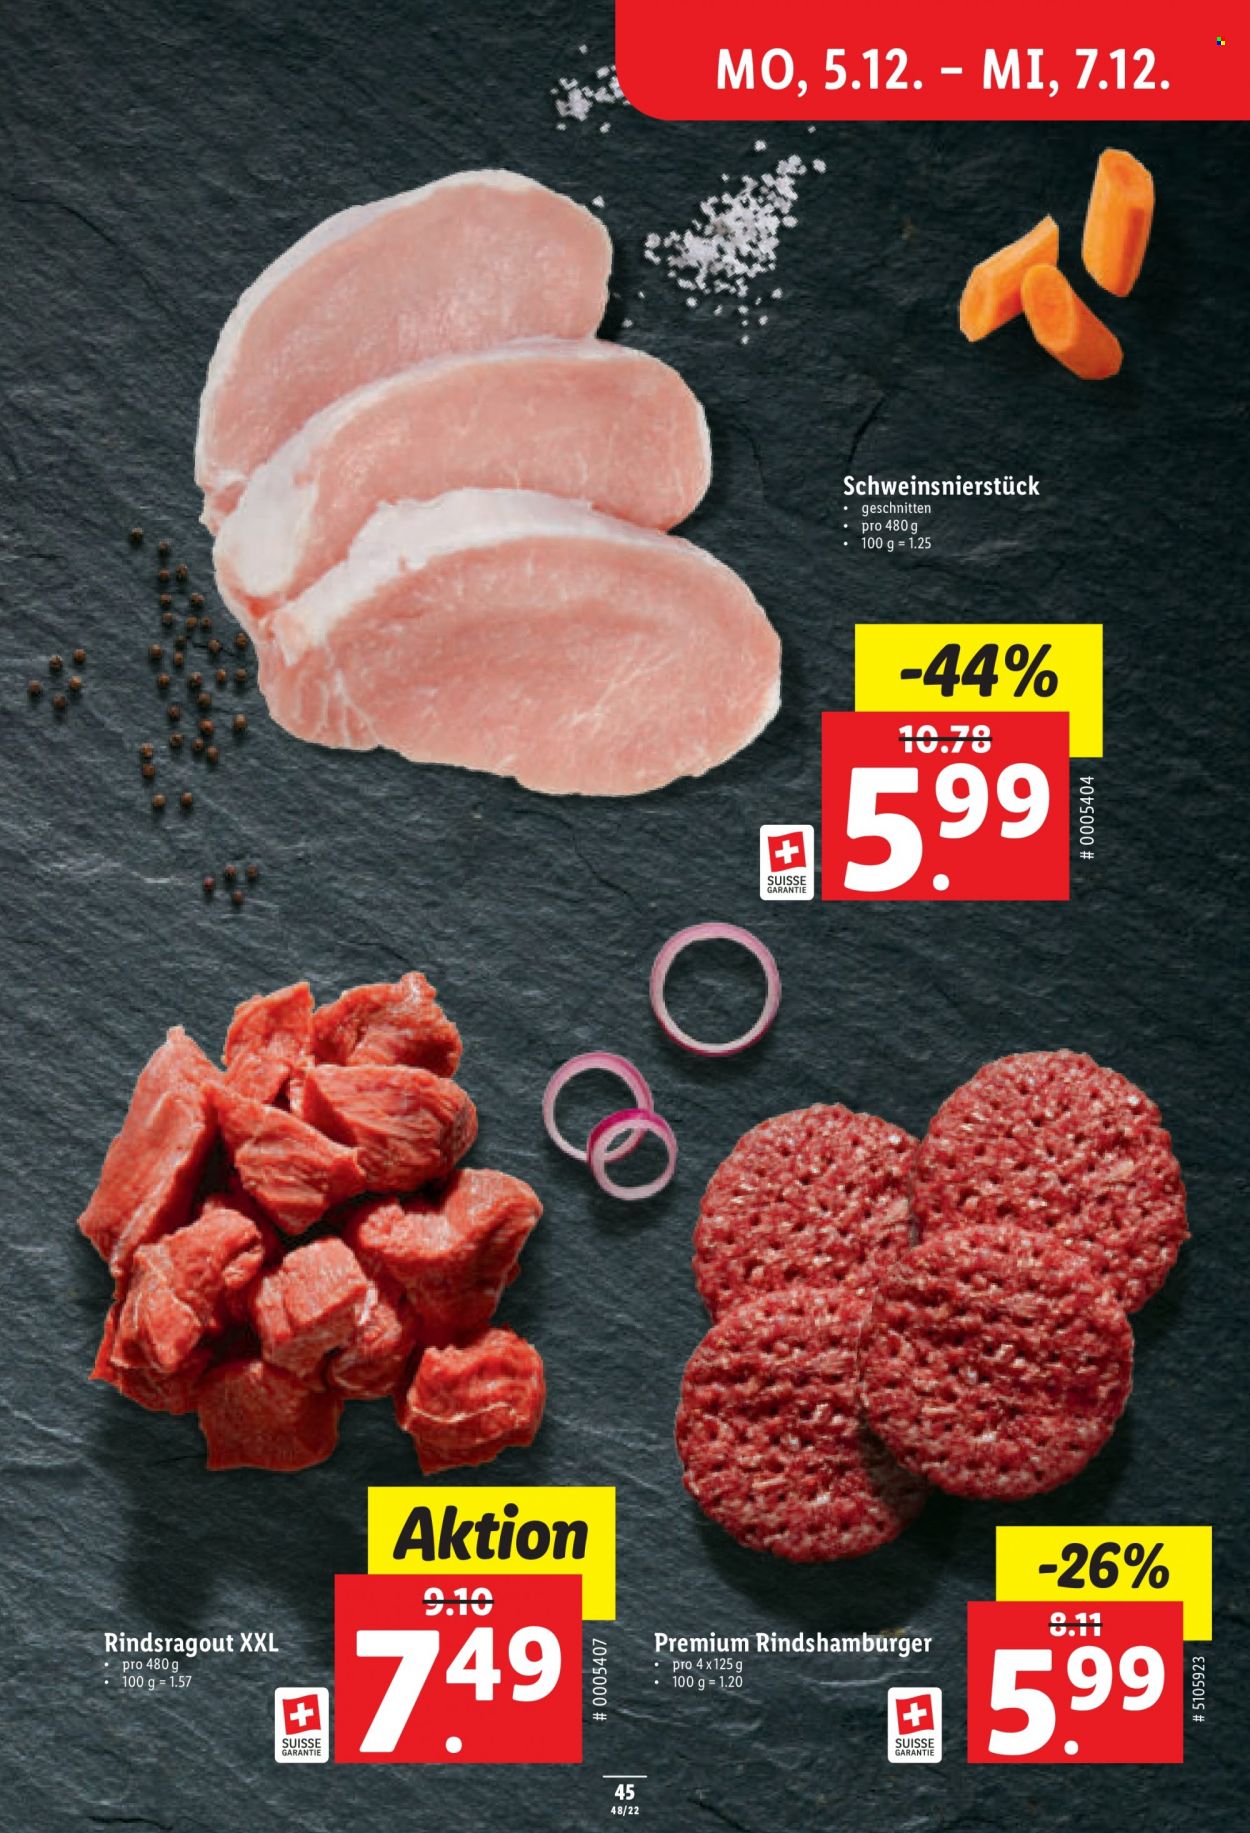 Catalogue Lidl - 1.12.2022 - 7.12.2022. Page 45.